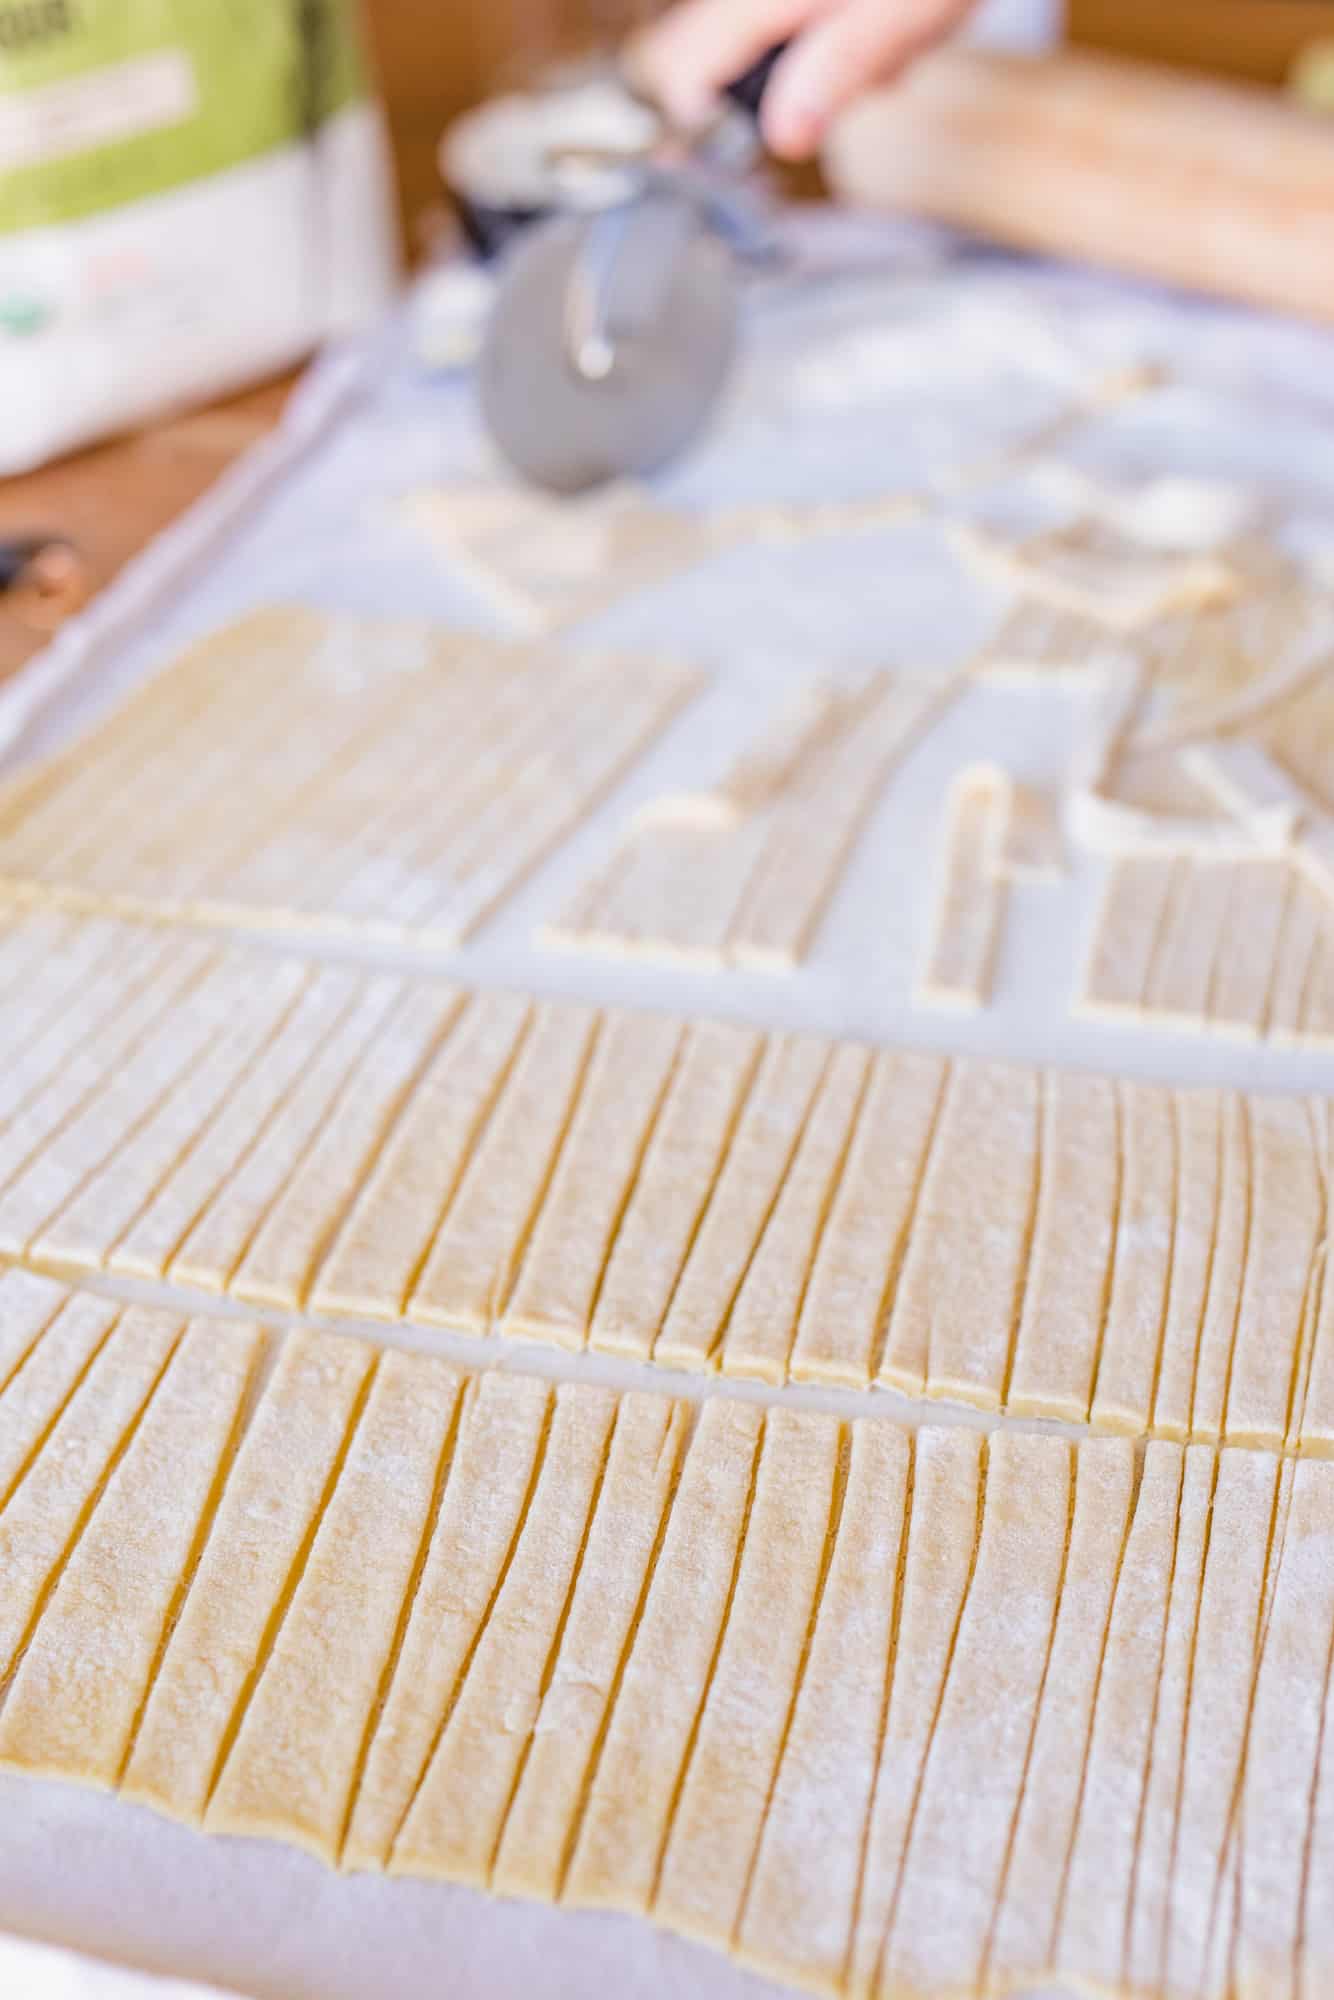 Using a pizza cutter Ashley slices fresh rolled out pasta dough for egg noodles.